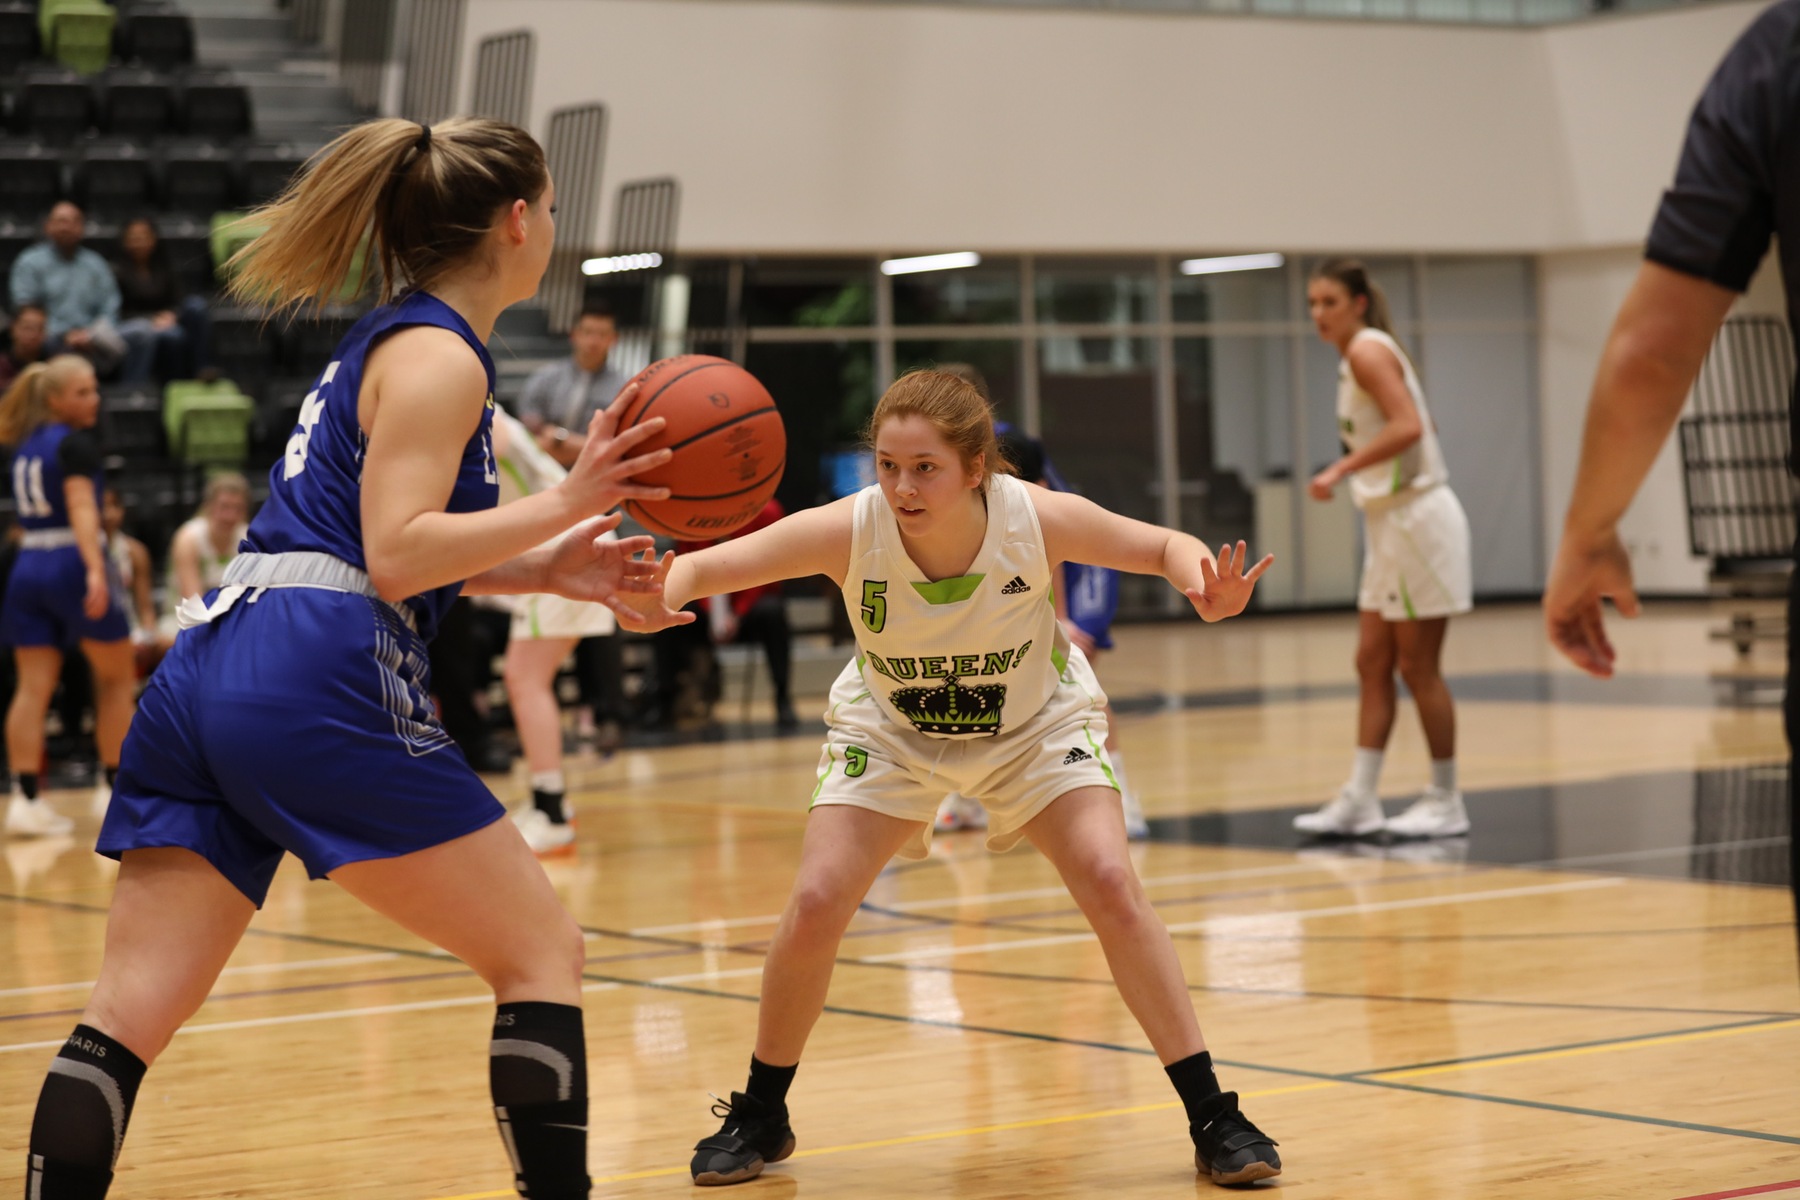 Samantha Wade (5) had 2 points and 2 rebounds for the Queens. Picture - Colby Brochu Photography